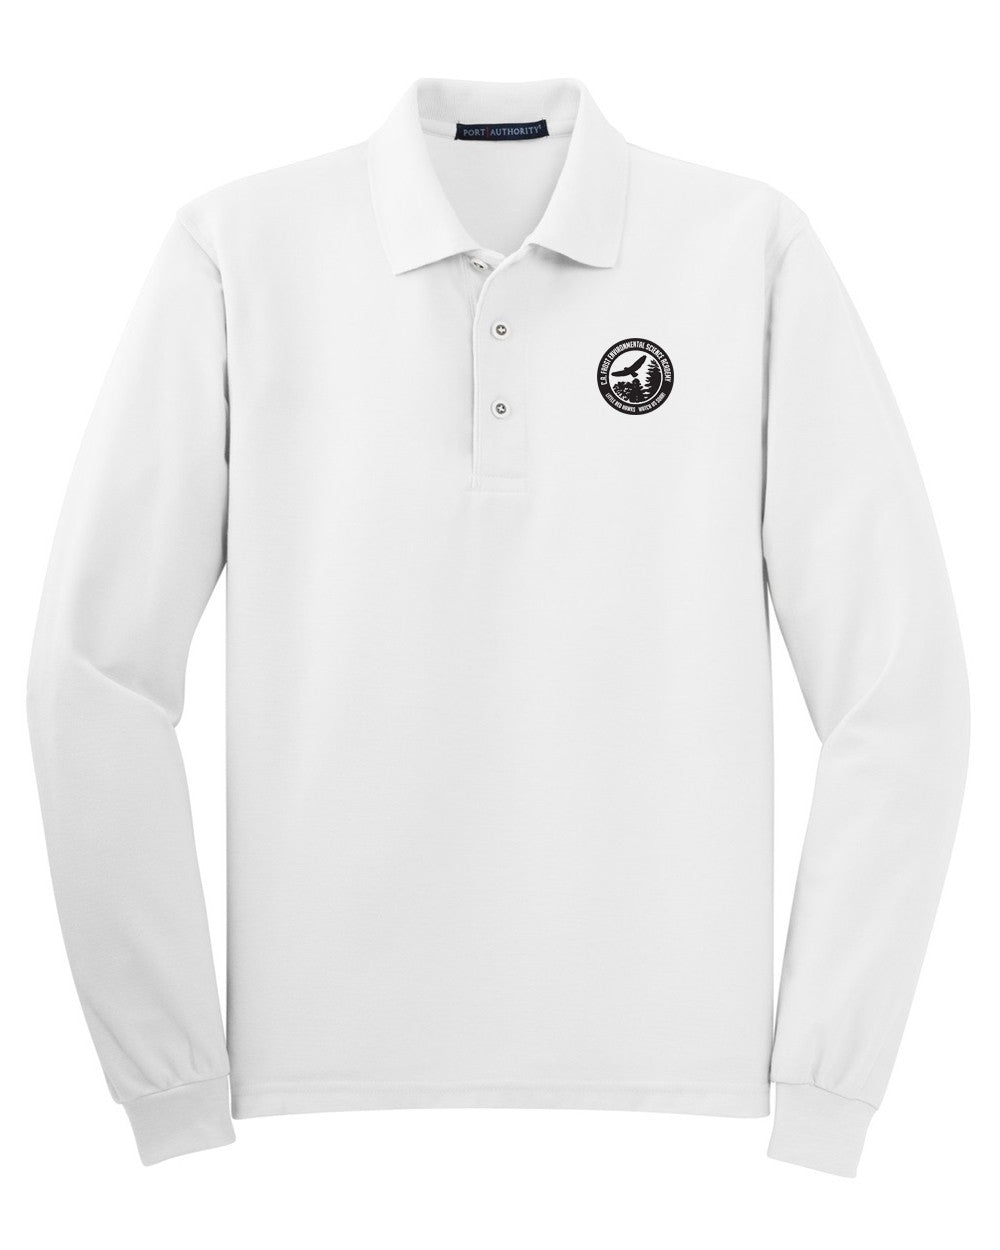 C.A. Frost Long Sleeve Polo